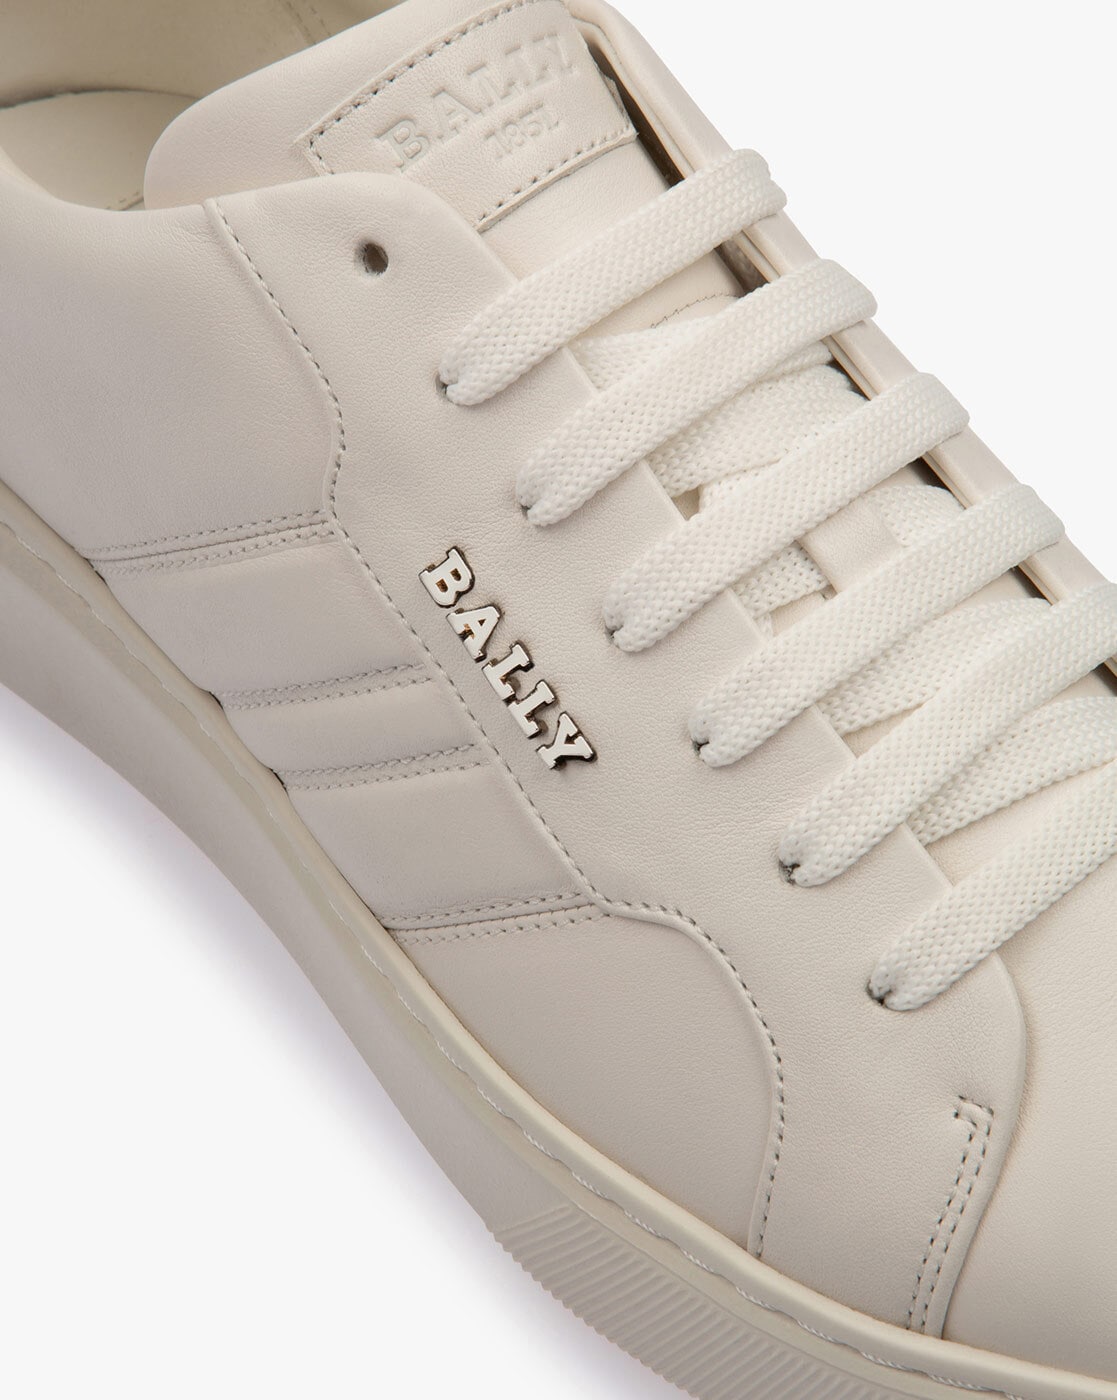 Shop Bally Rebby Striped Leather Low-Top Sneakers | Saks Fifth Avenue